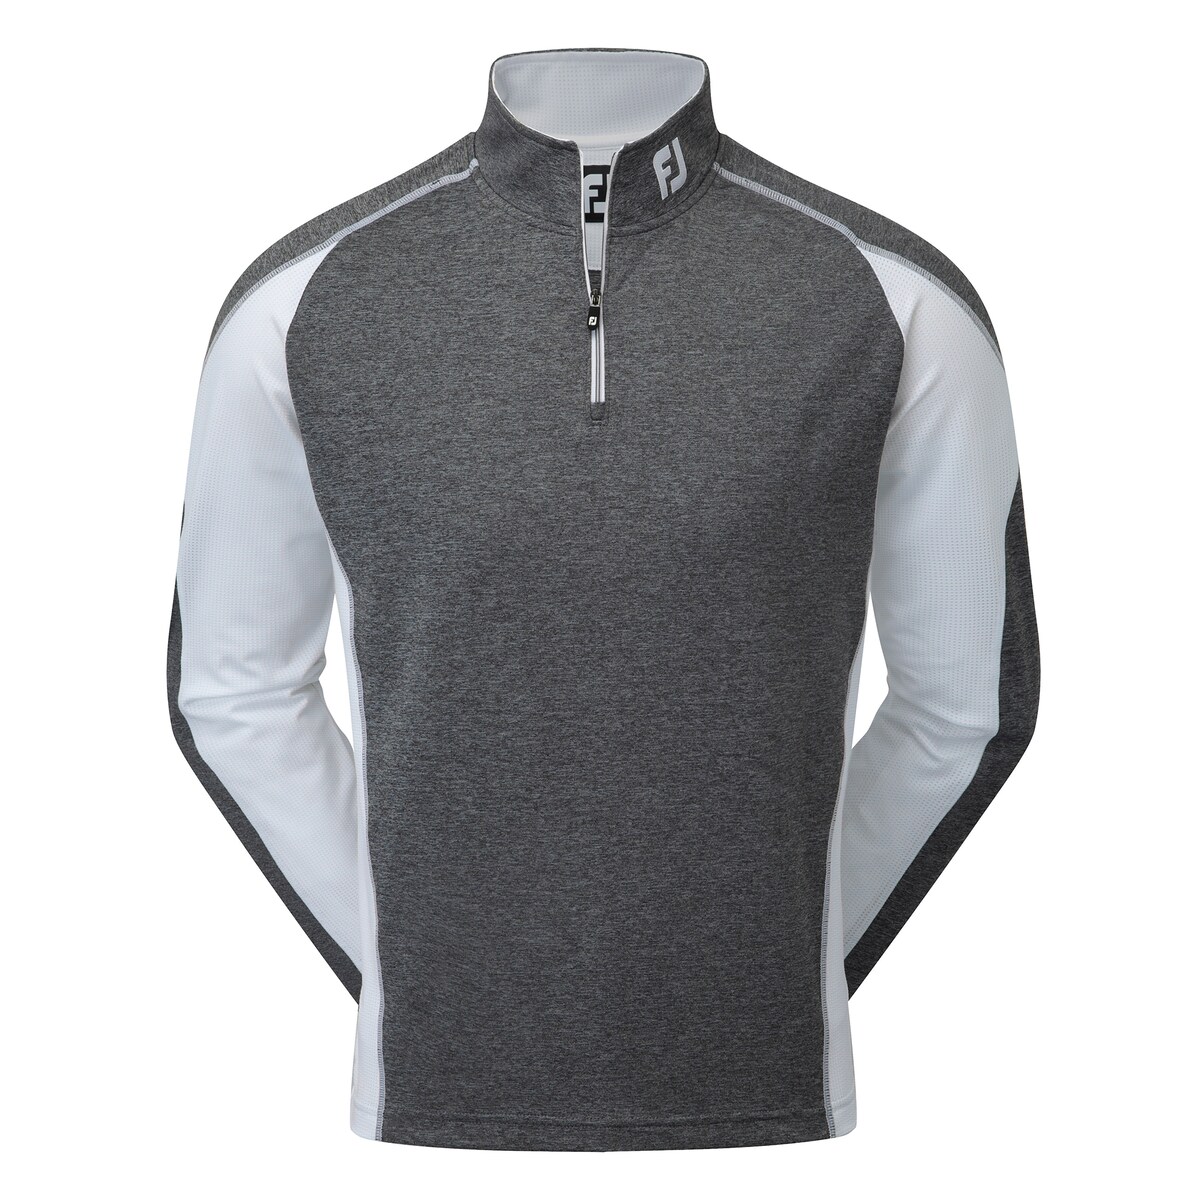 Mixed Texture Sport Chill-Out - FootJoy EMEA